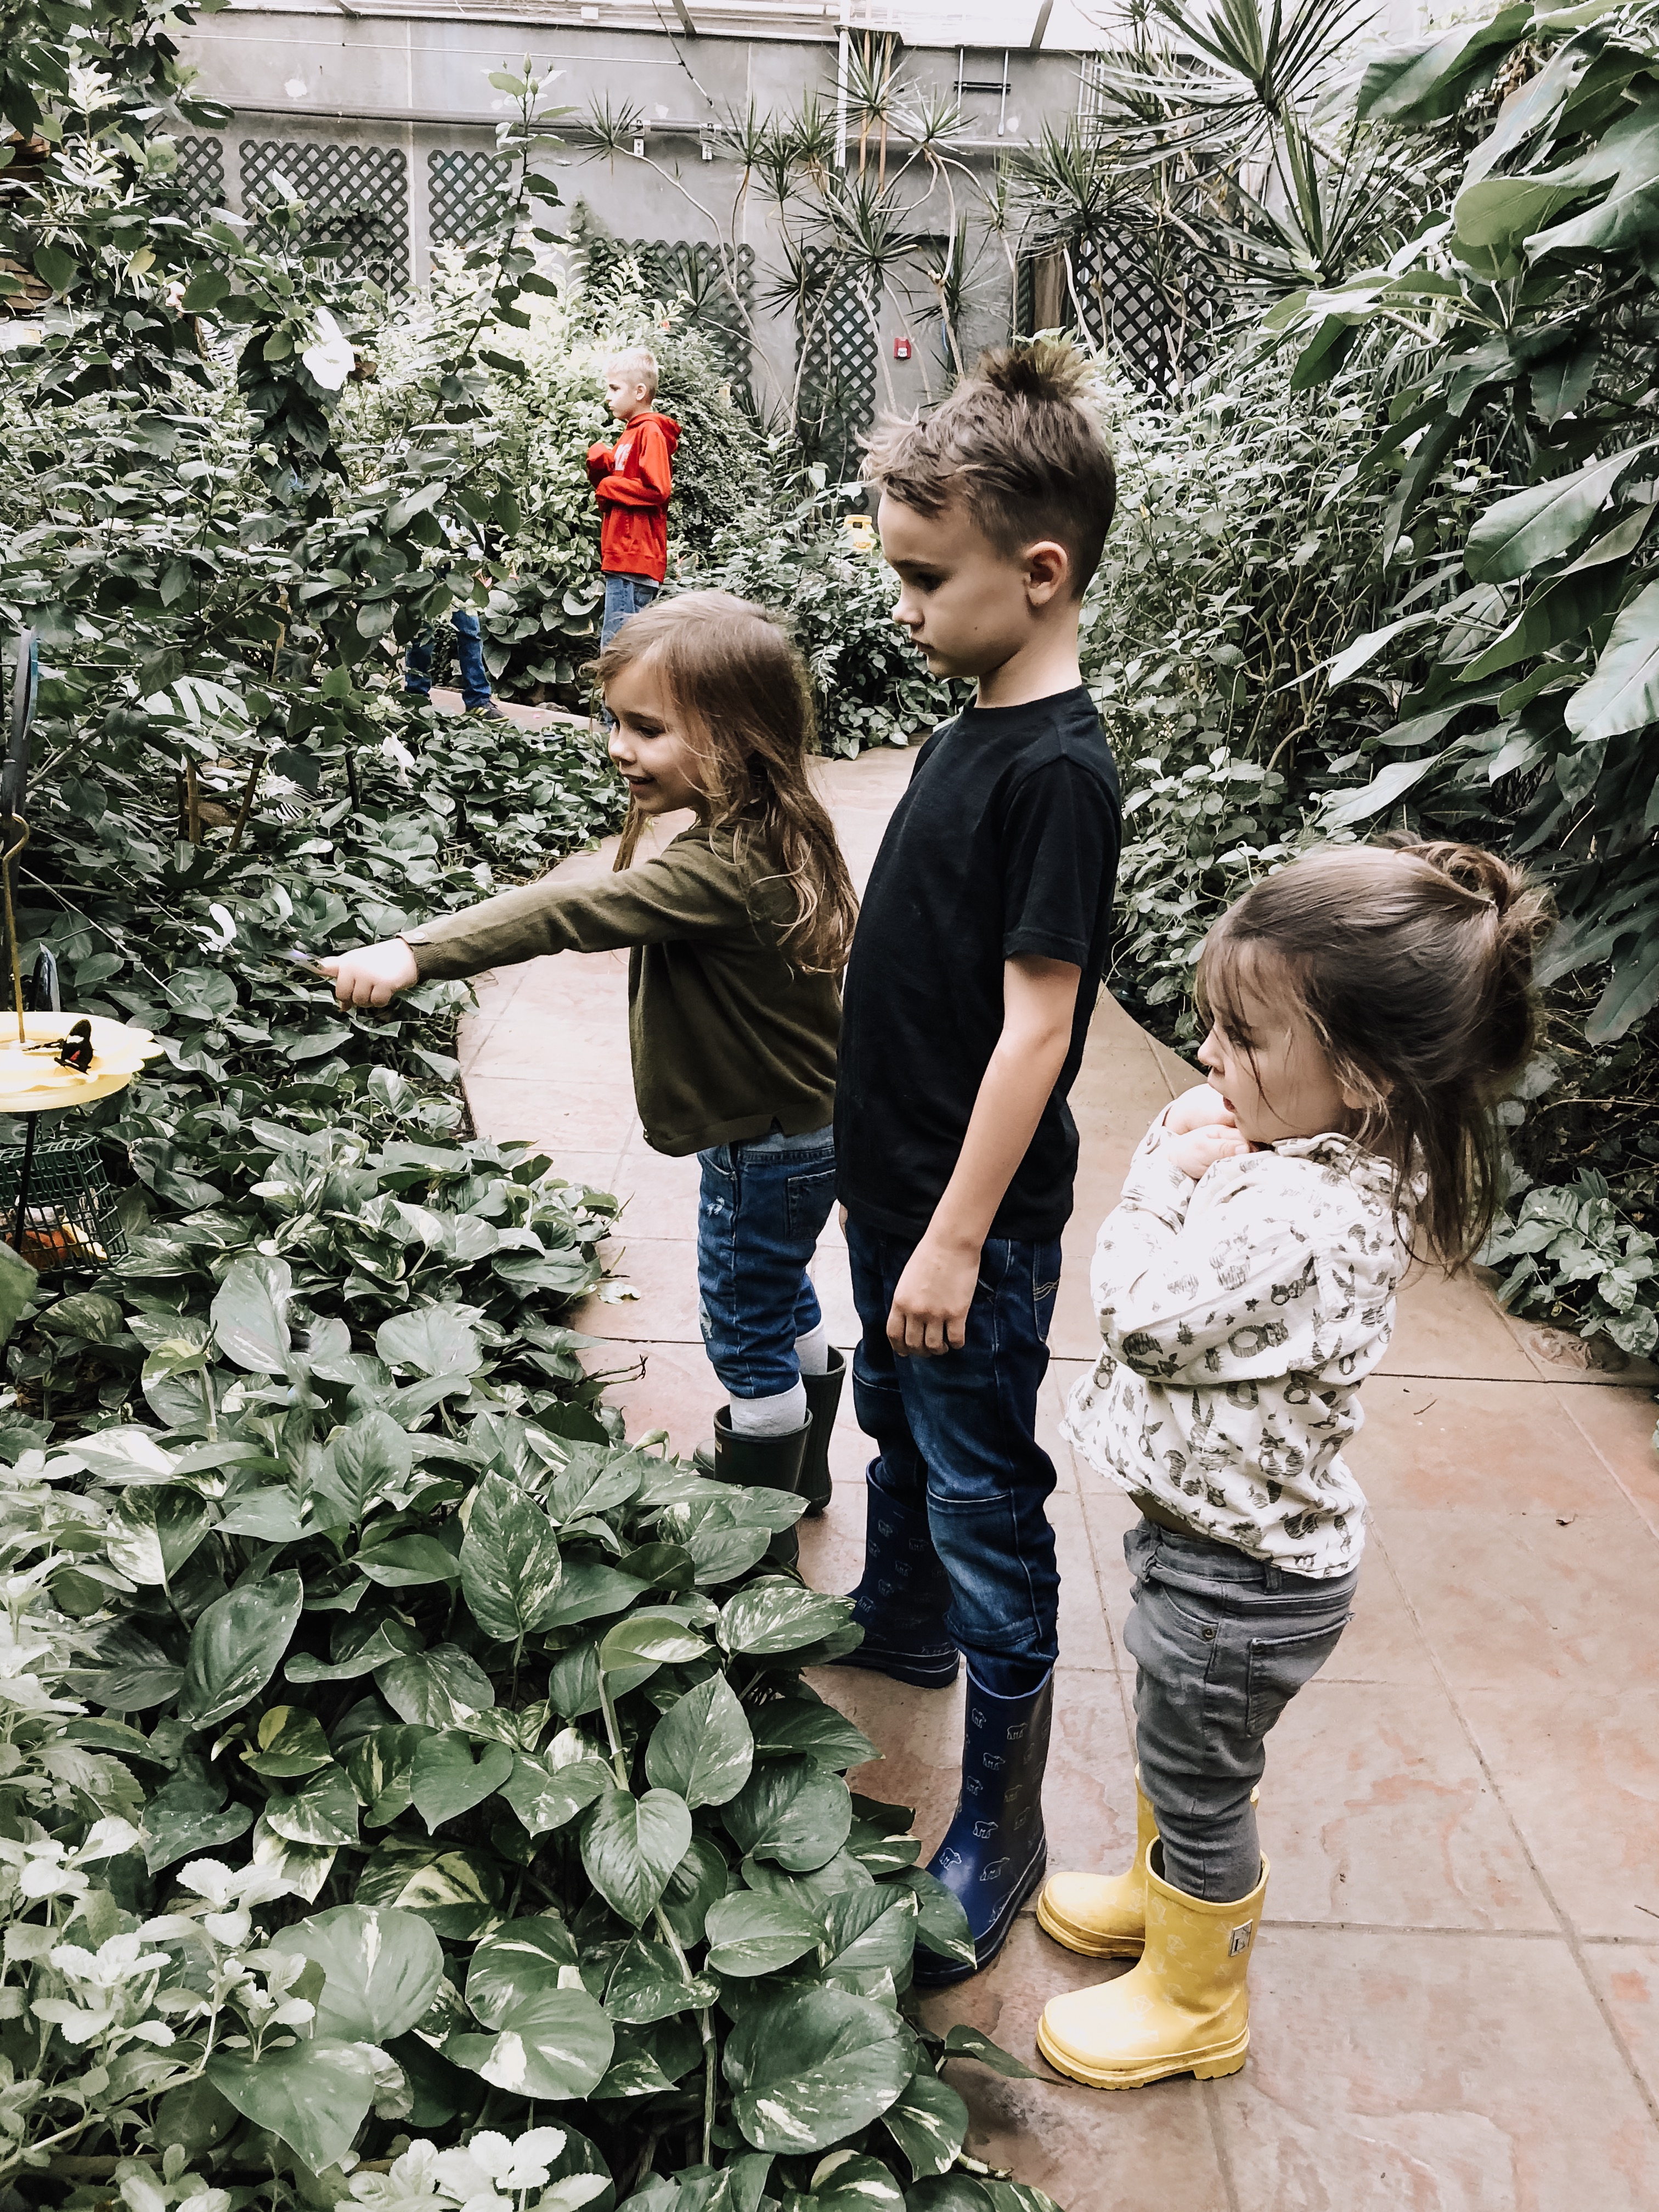 checking out the butterfly house and aquarium | thelovedesignedlife.com #butterflyhouse #funwithkids #visitsd